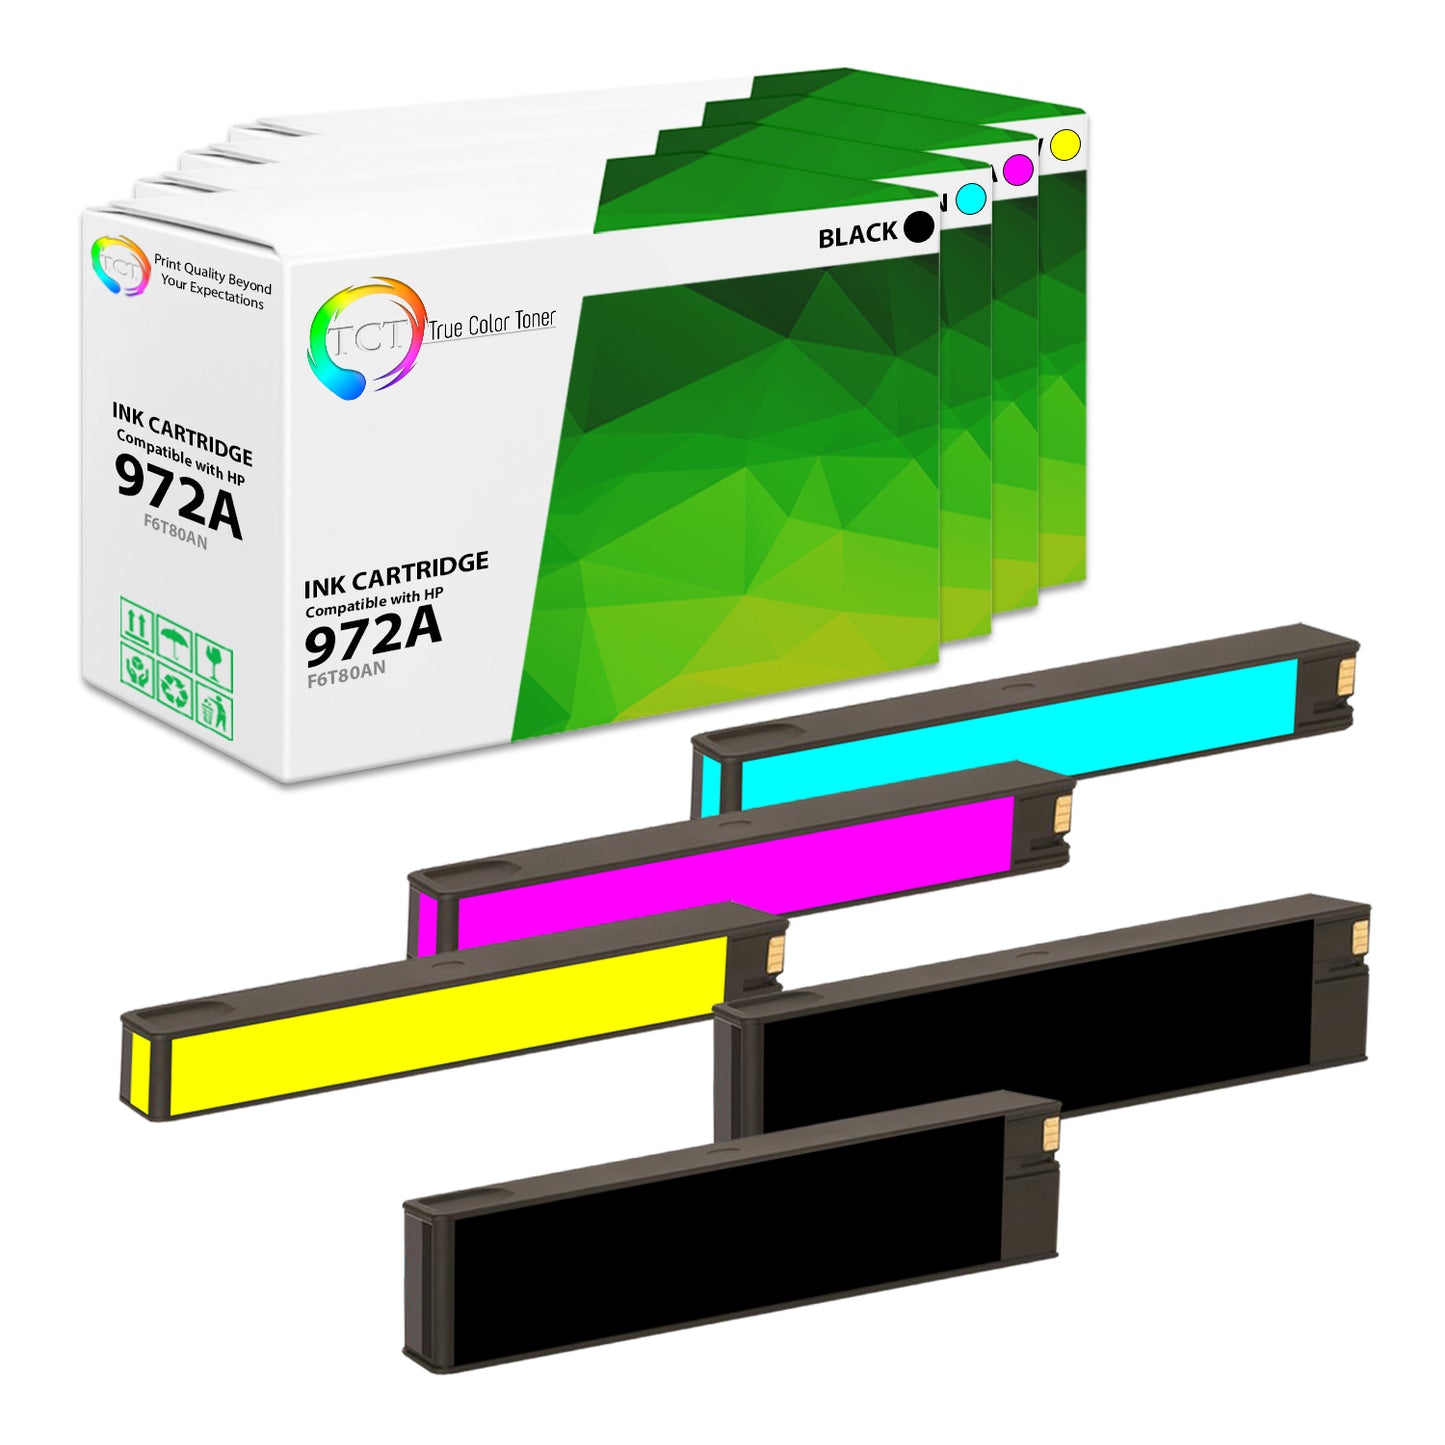 TCT Compatible Ink Cartridge Replacement for the HP 972A Series - 5 Pack (B, C, M, Y)